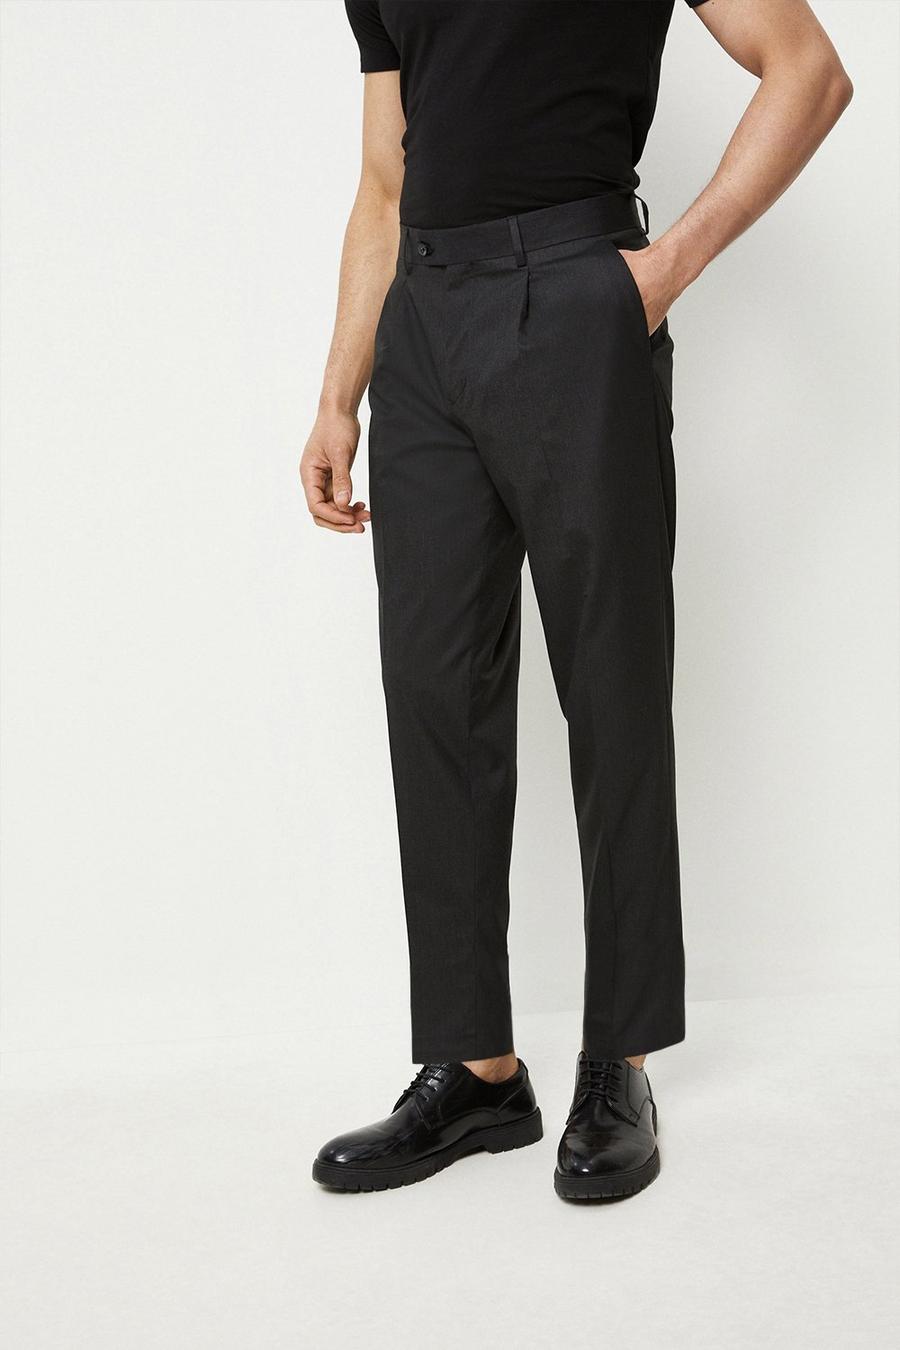 194 Slim Tapered Fit Charcoal Suit Trouser